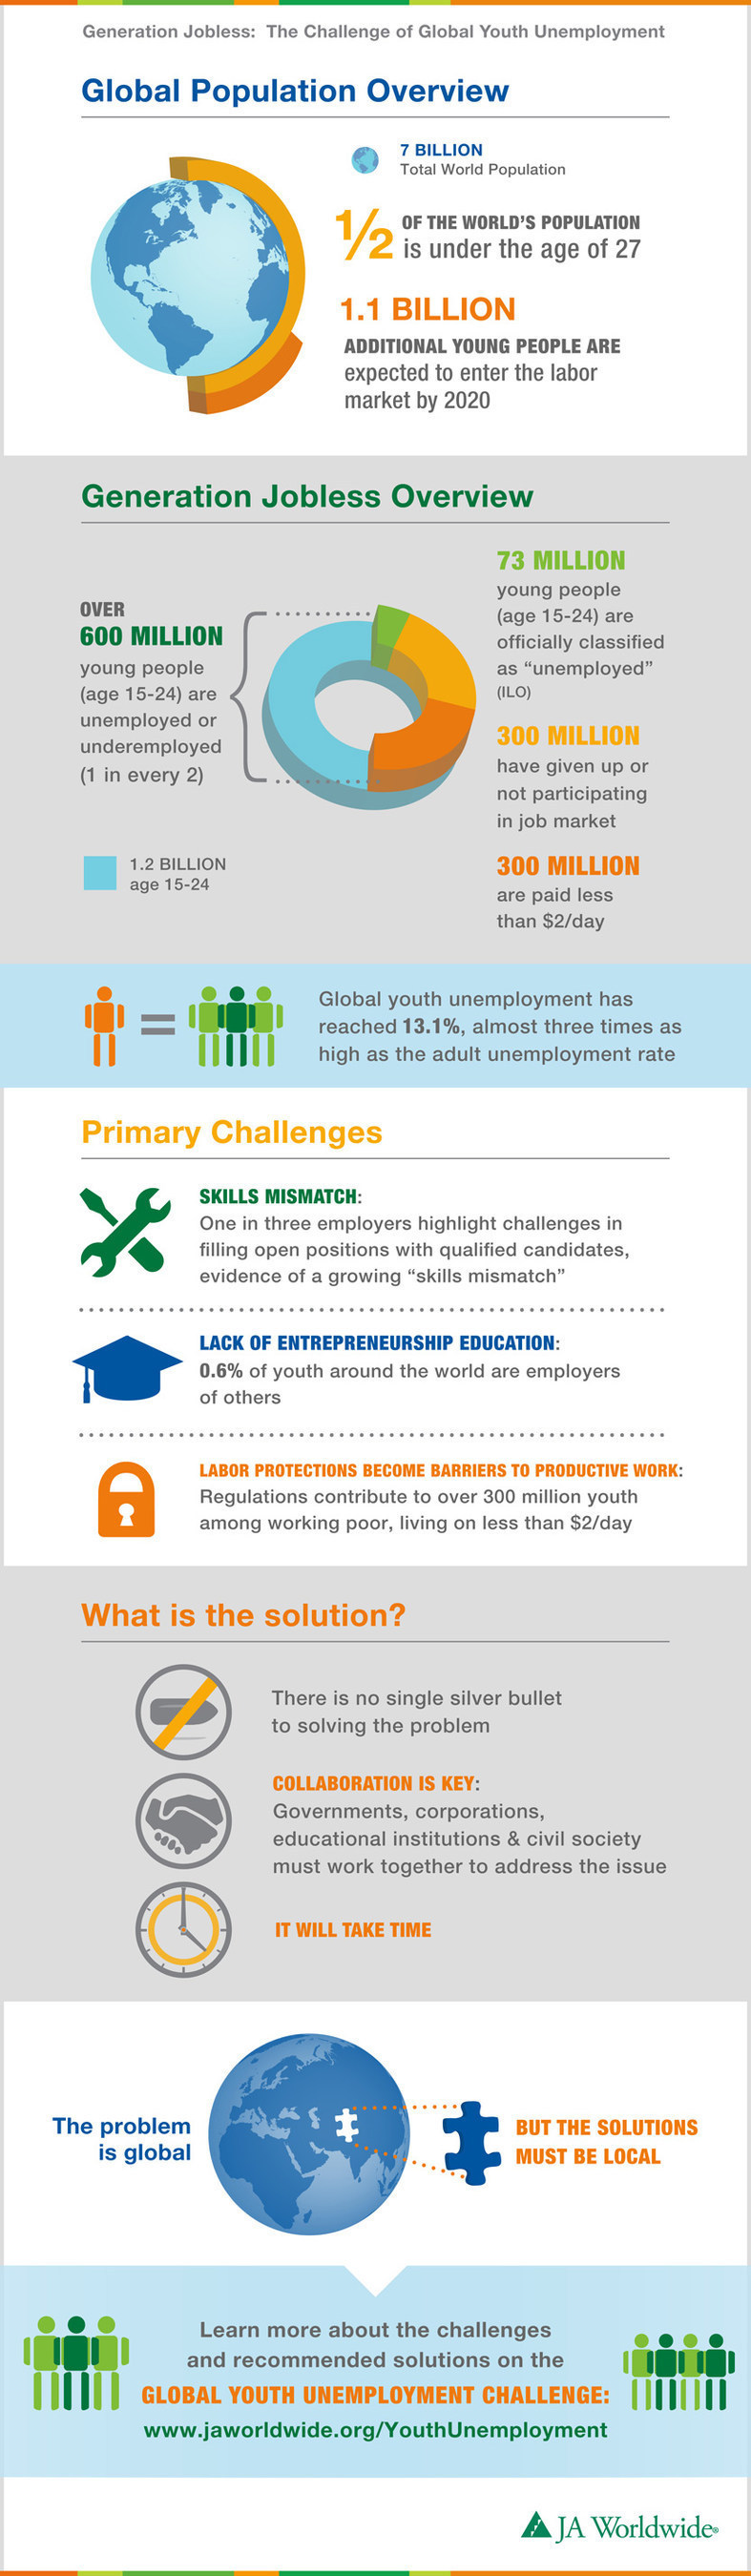 JA Worldwide and Citi Foundation highlight the challenges faced by high unemployment across the world in "Generation Jobless: The Challenge of Global Youth Unemployment."